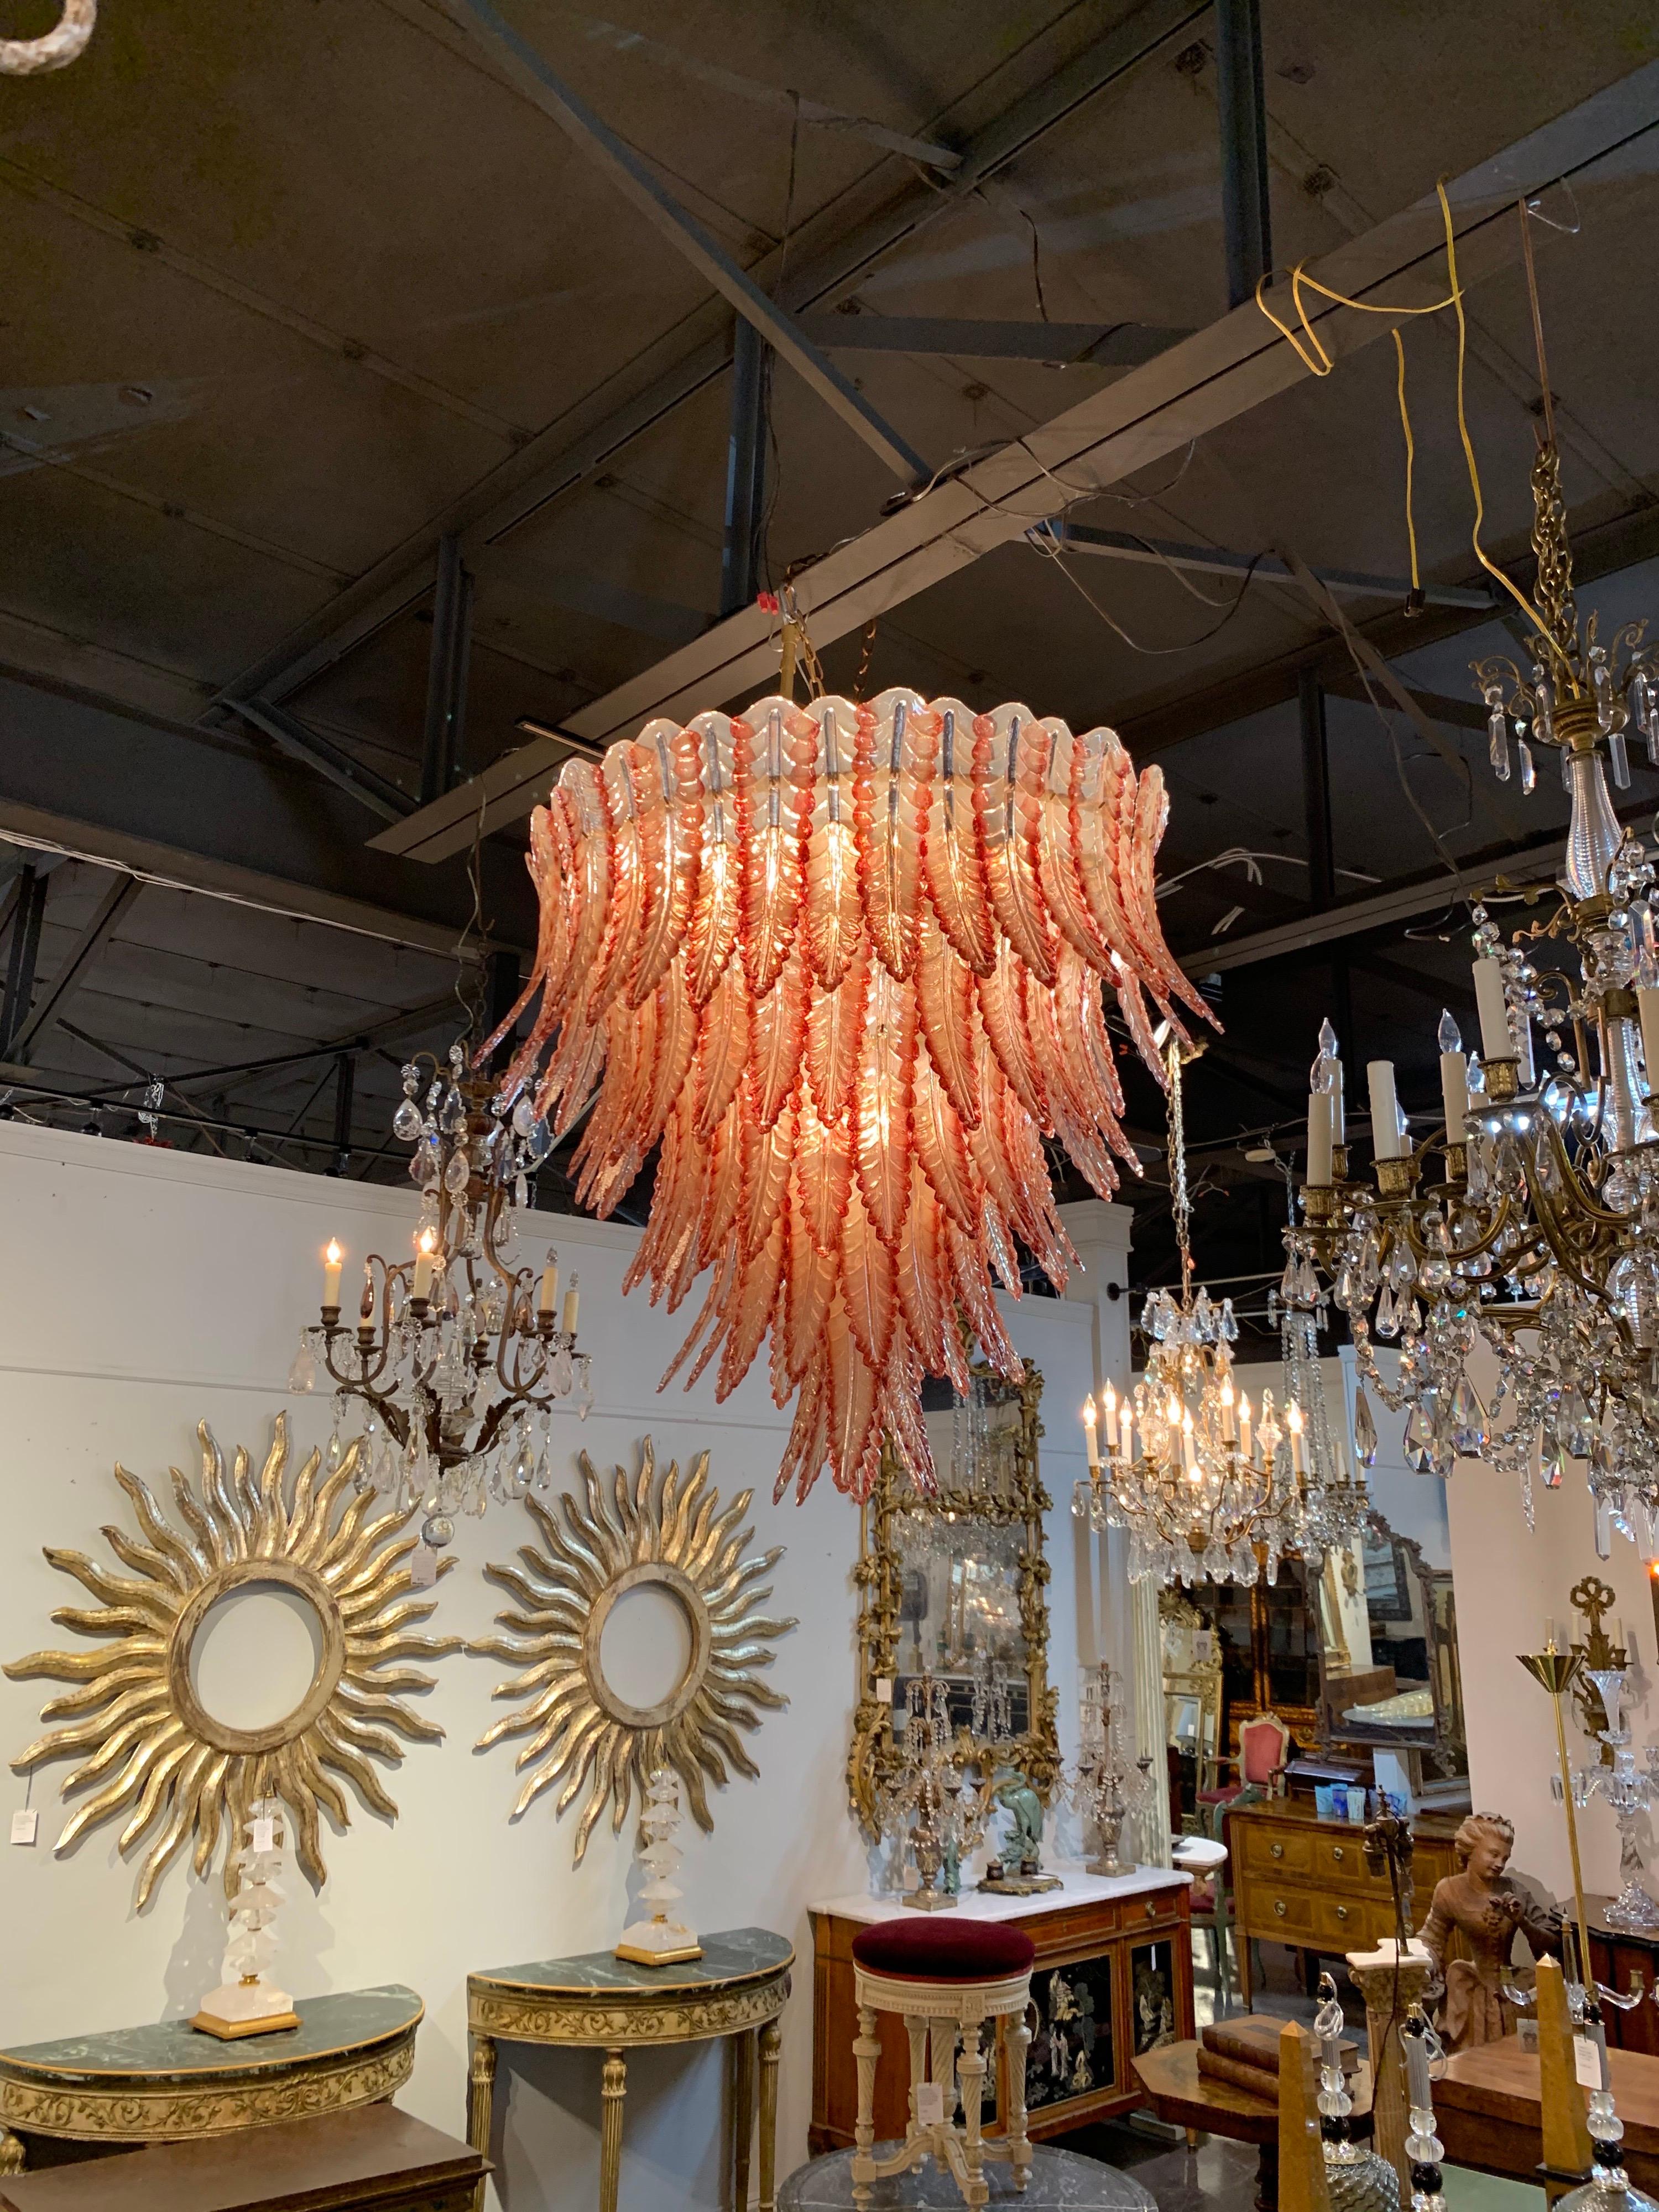 Stunning custom coral colored Murano glass leaf form waterfall chandelier. Glistening glass and large scale make this fixture super impressive. A true work of art!!